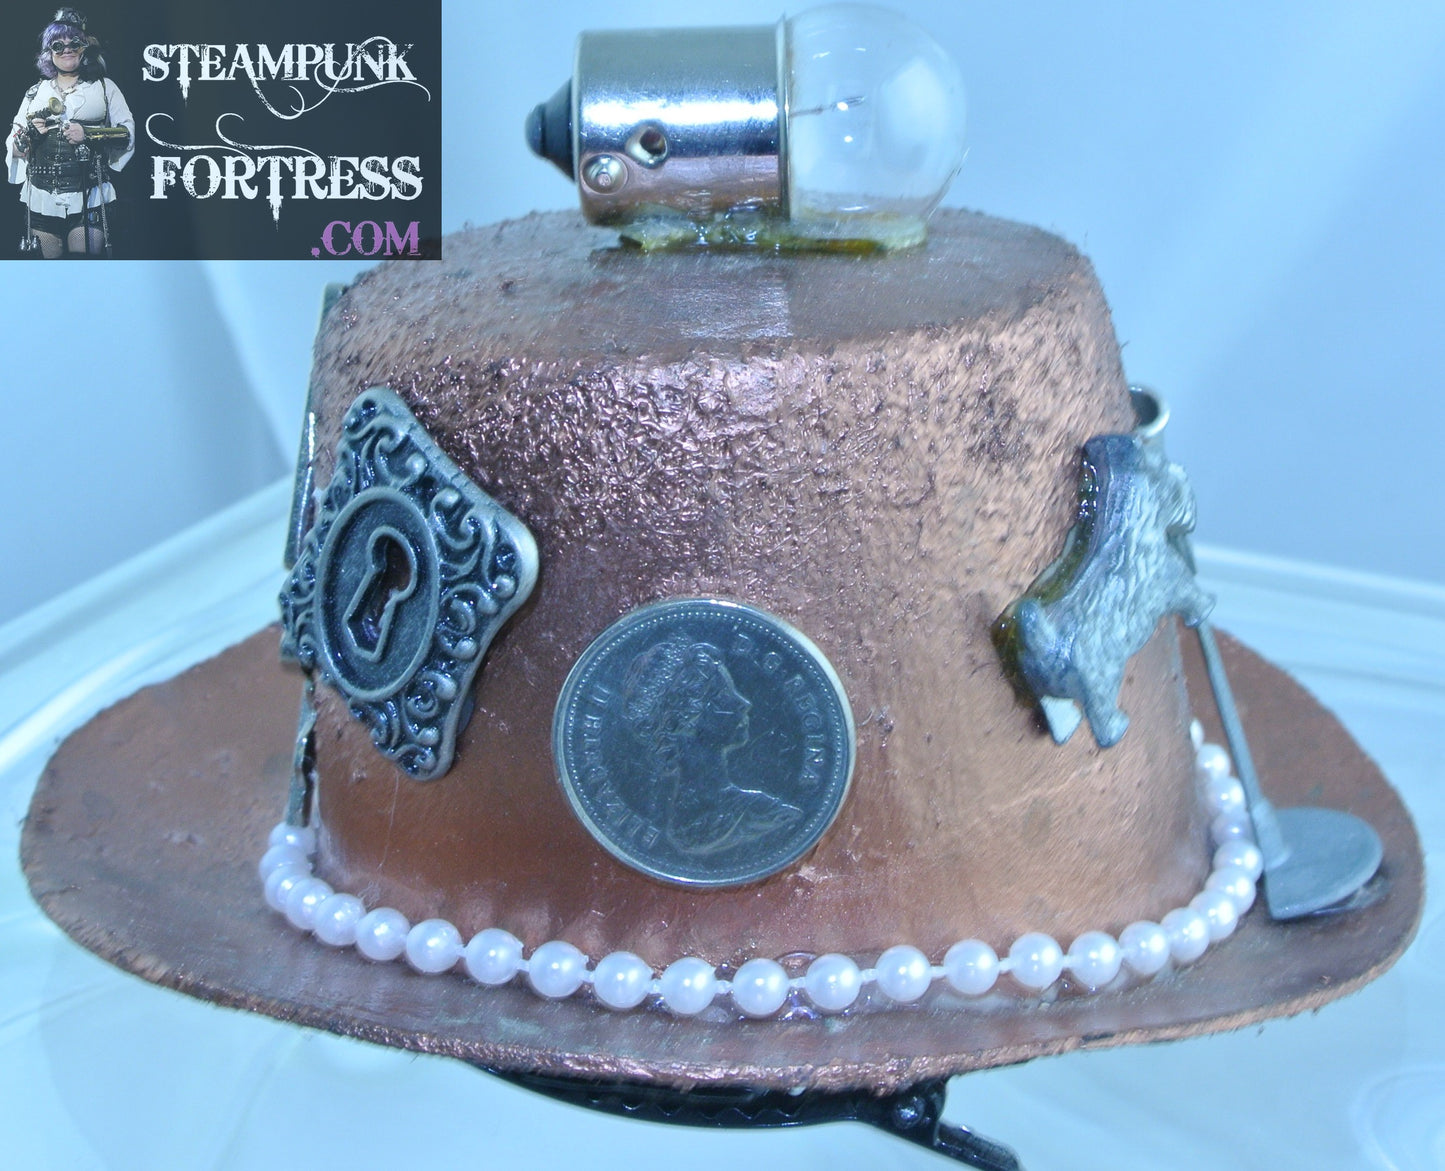 COPPER RAILROAD SIGN SILVER SCHNAUZER DOG TOKEN MUG TIME WORD STICK KNOWLEDGE TOKEN KEY KEYHOLE QUEEN ELIZABETH UK COIN PEARL BAND XS EXTRA SMALL MINI TOP HAT STARR WILDE STEAMPUNK FORTRESS